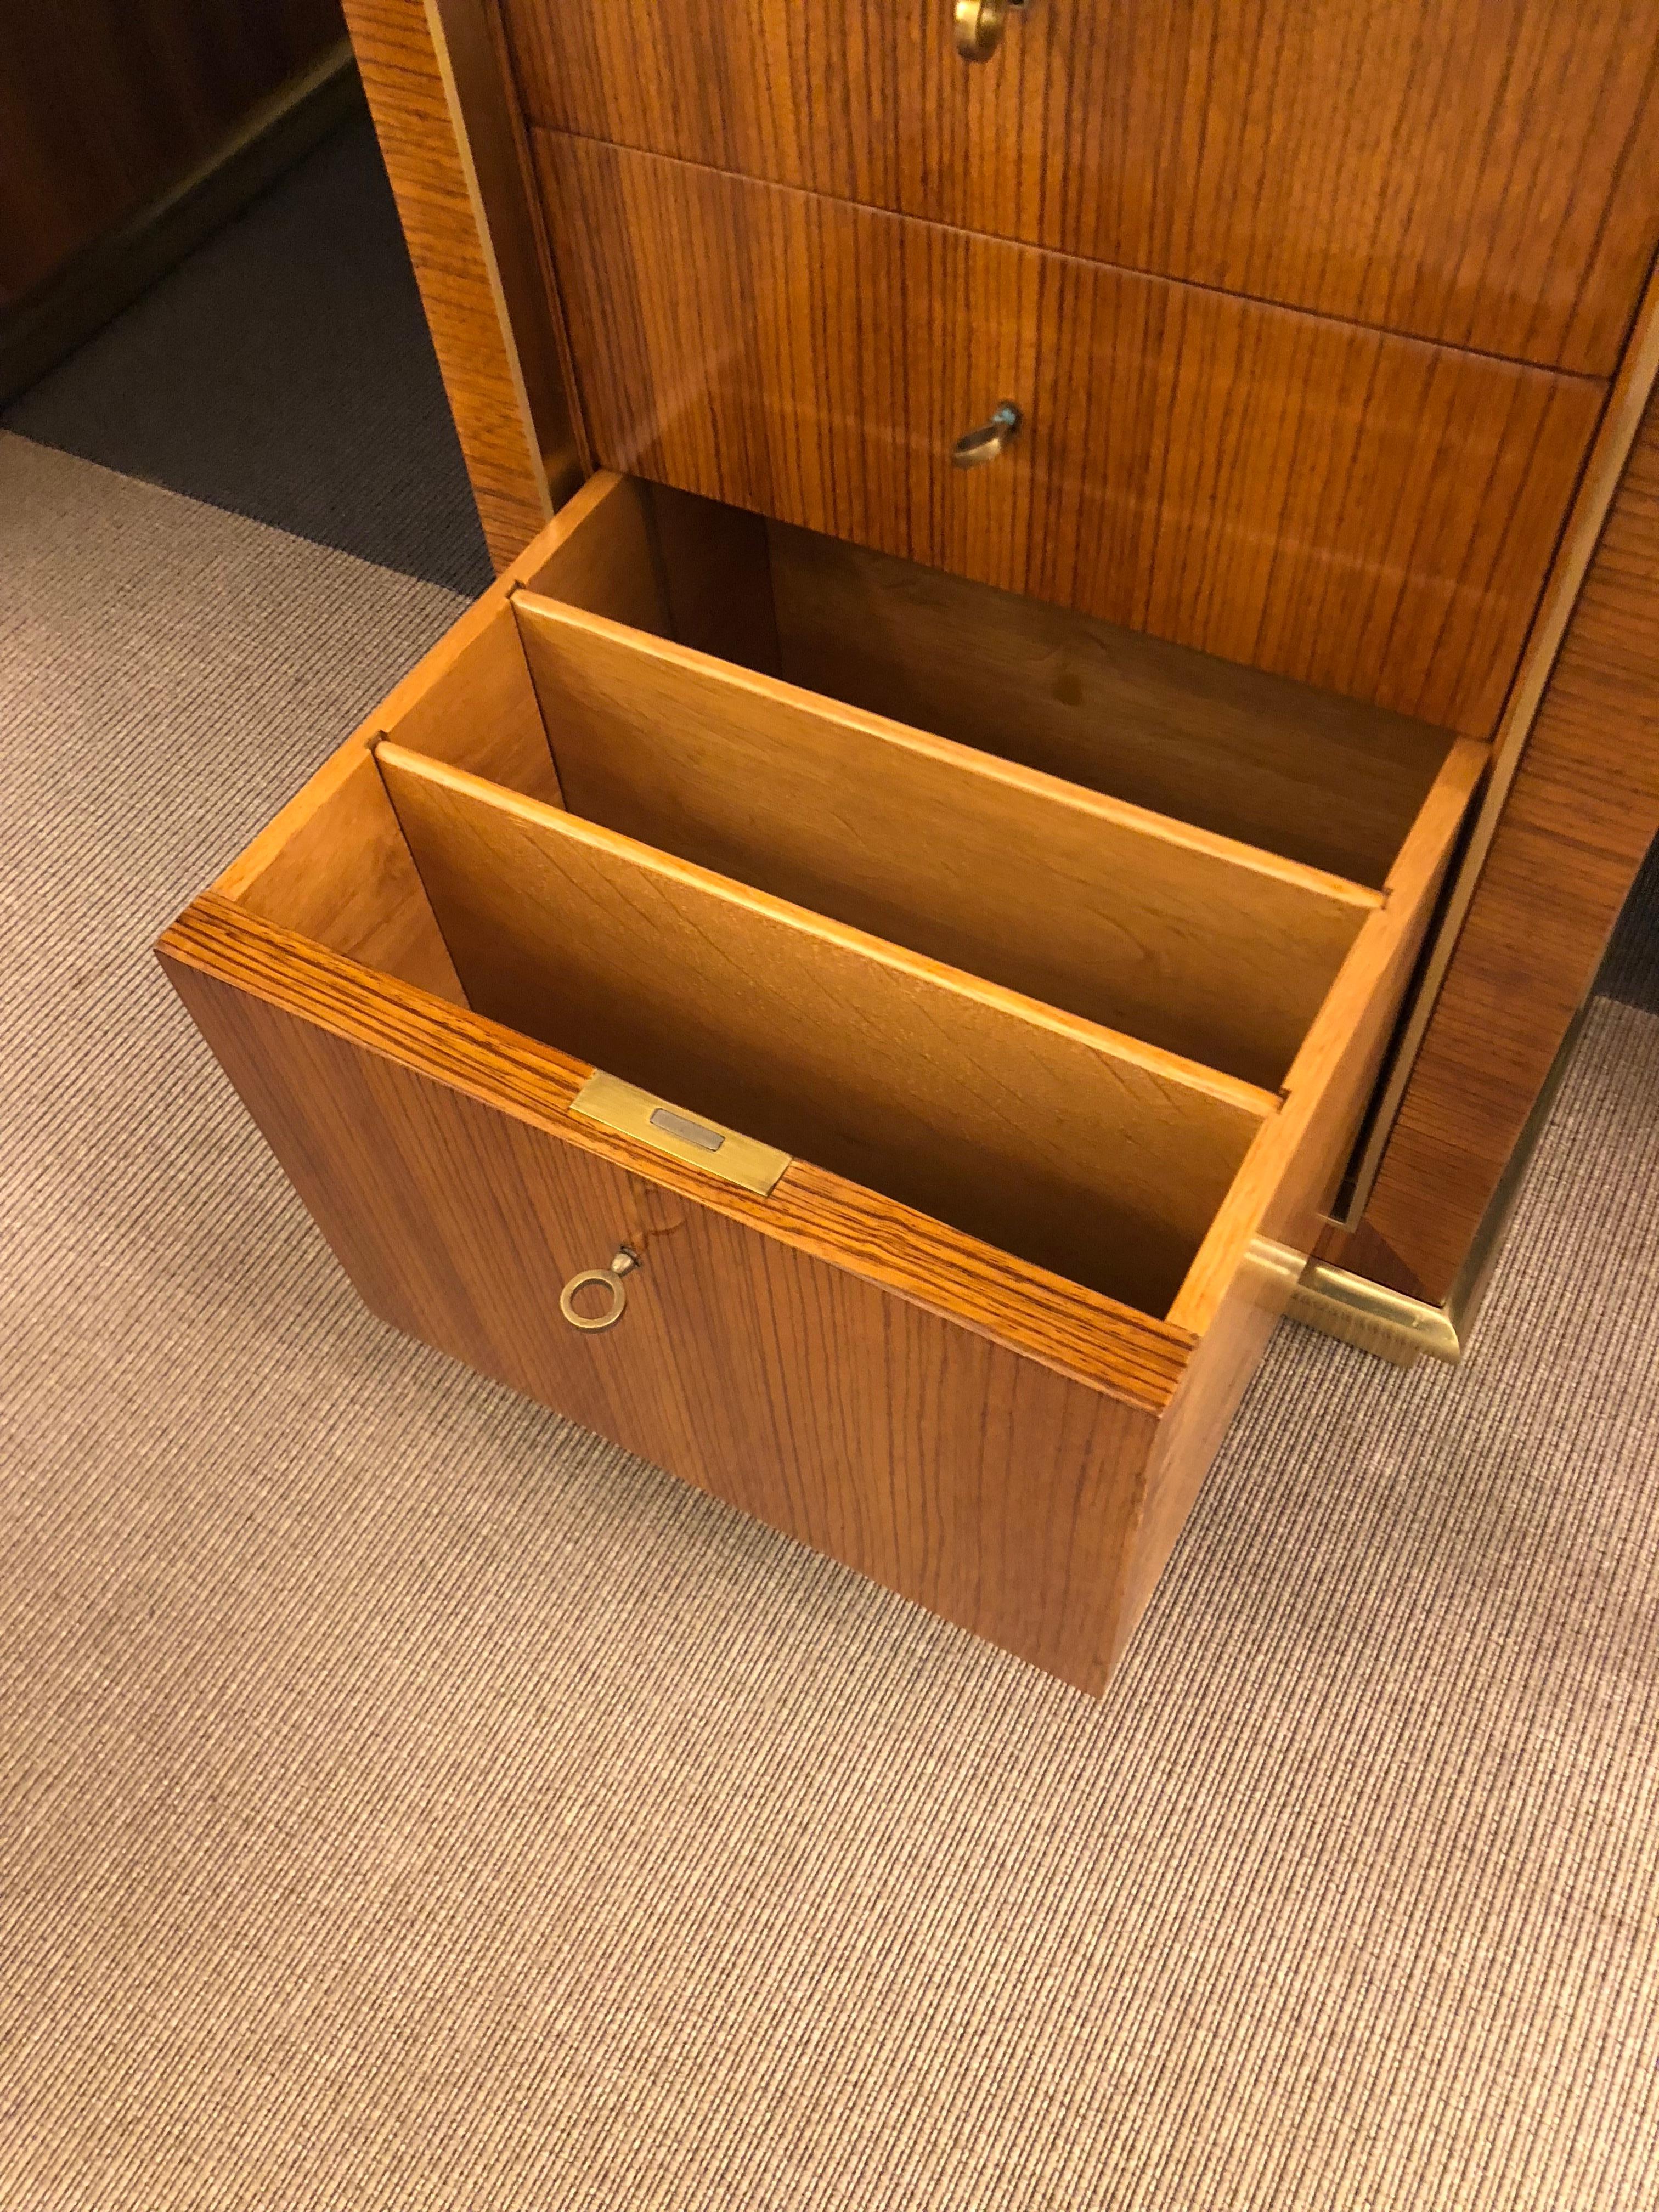 Rosewood desk with a bronze framed glass sitting atop a wooden surface and two cabinets, each featuring two drawers and a customizable filing cabinet, surrounded by a bronze frame. Designed by Royere and made by Maison Gouffe, tag intact.

OUR